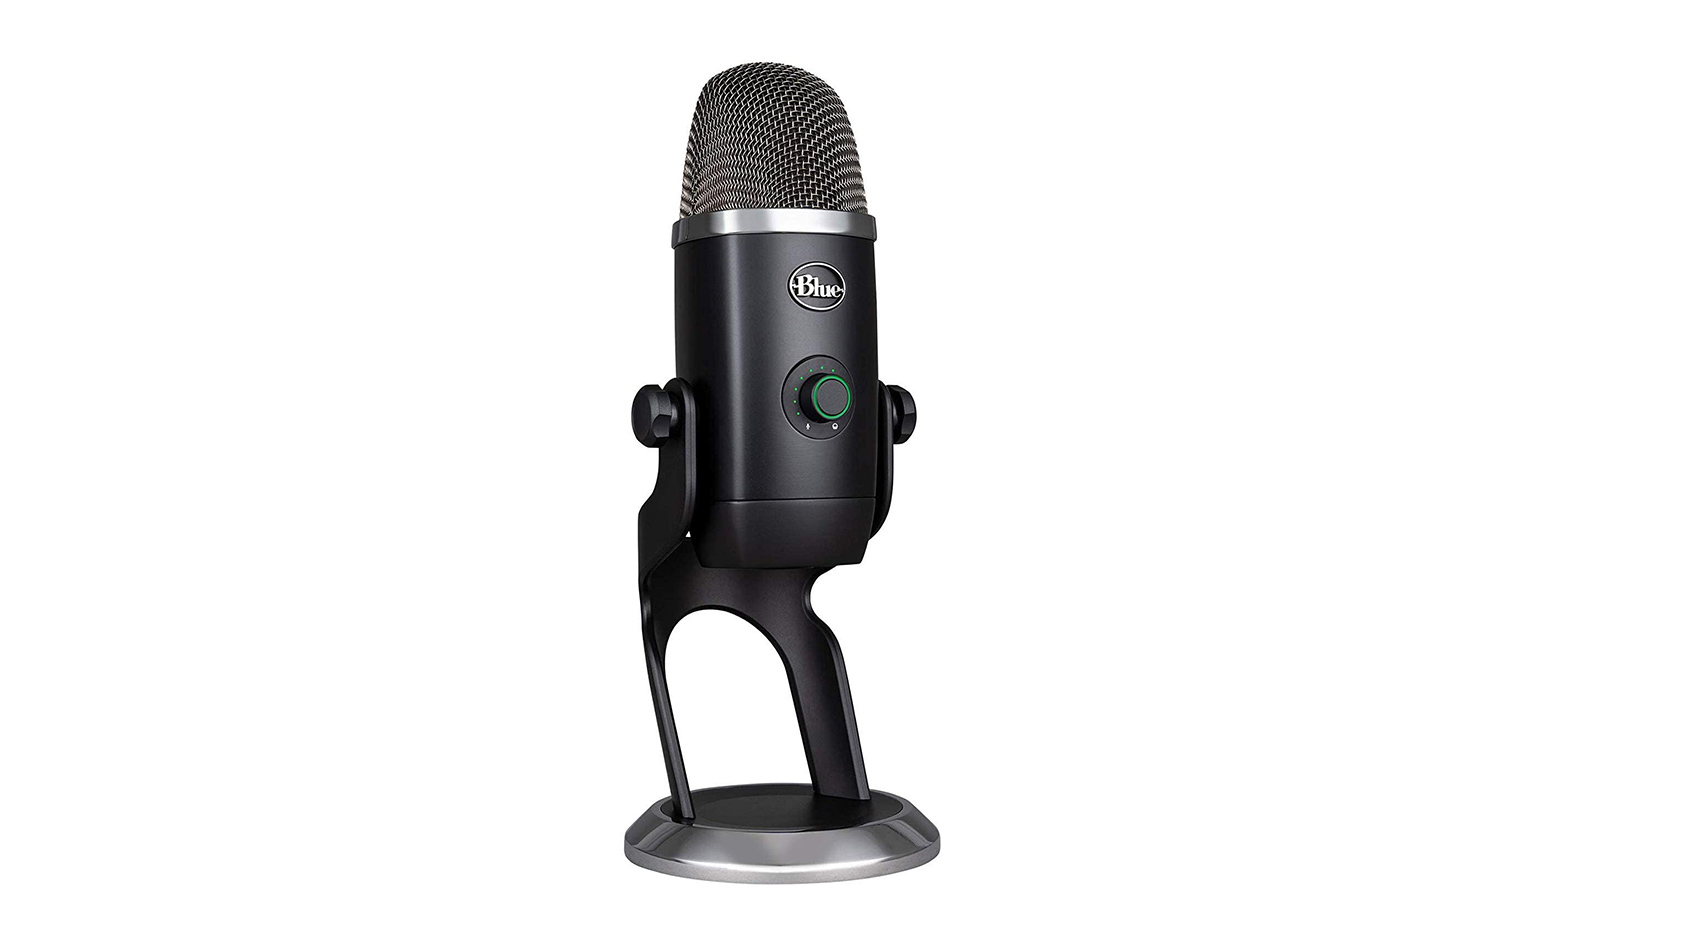 The Blue Yeti X USB microphone against a white background.